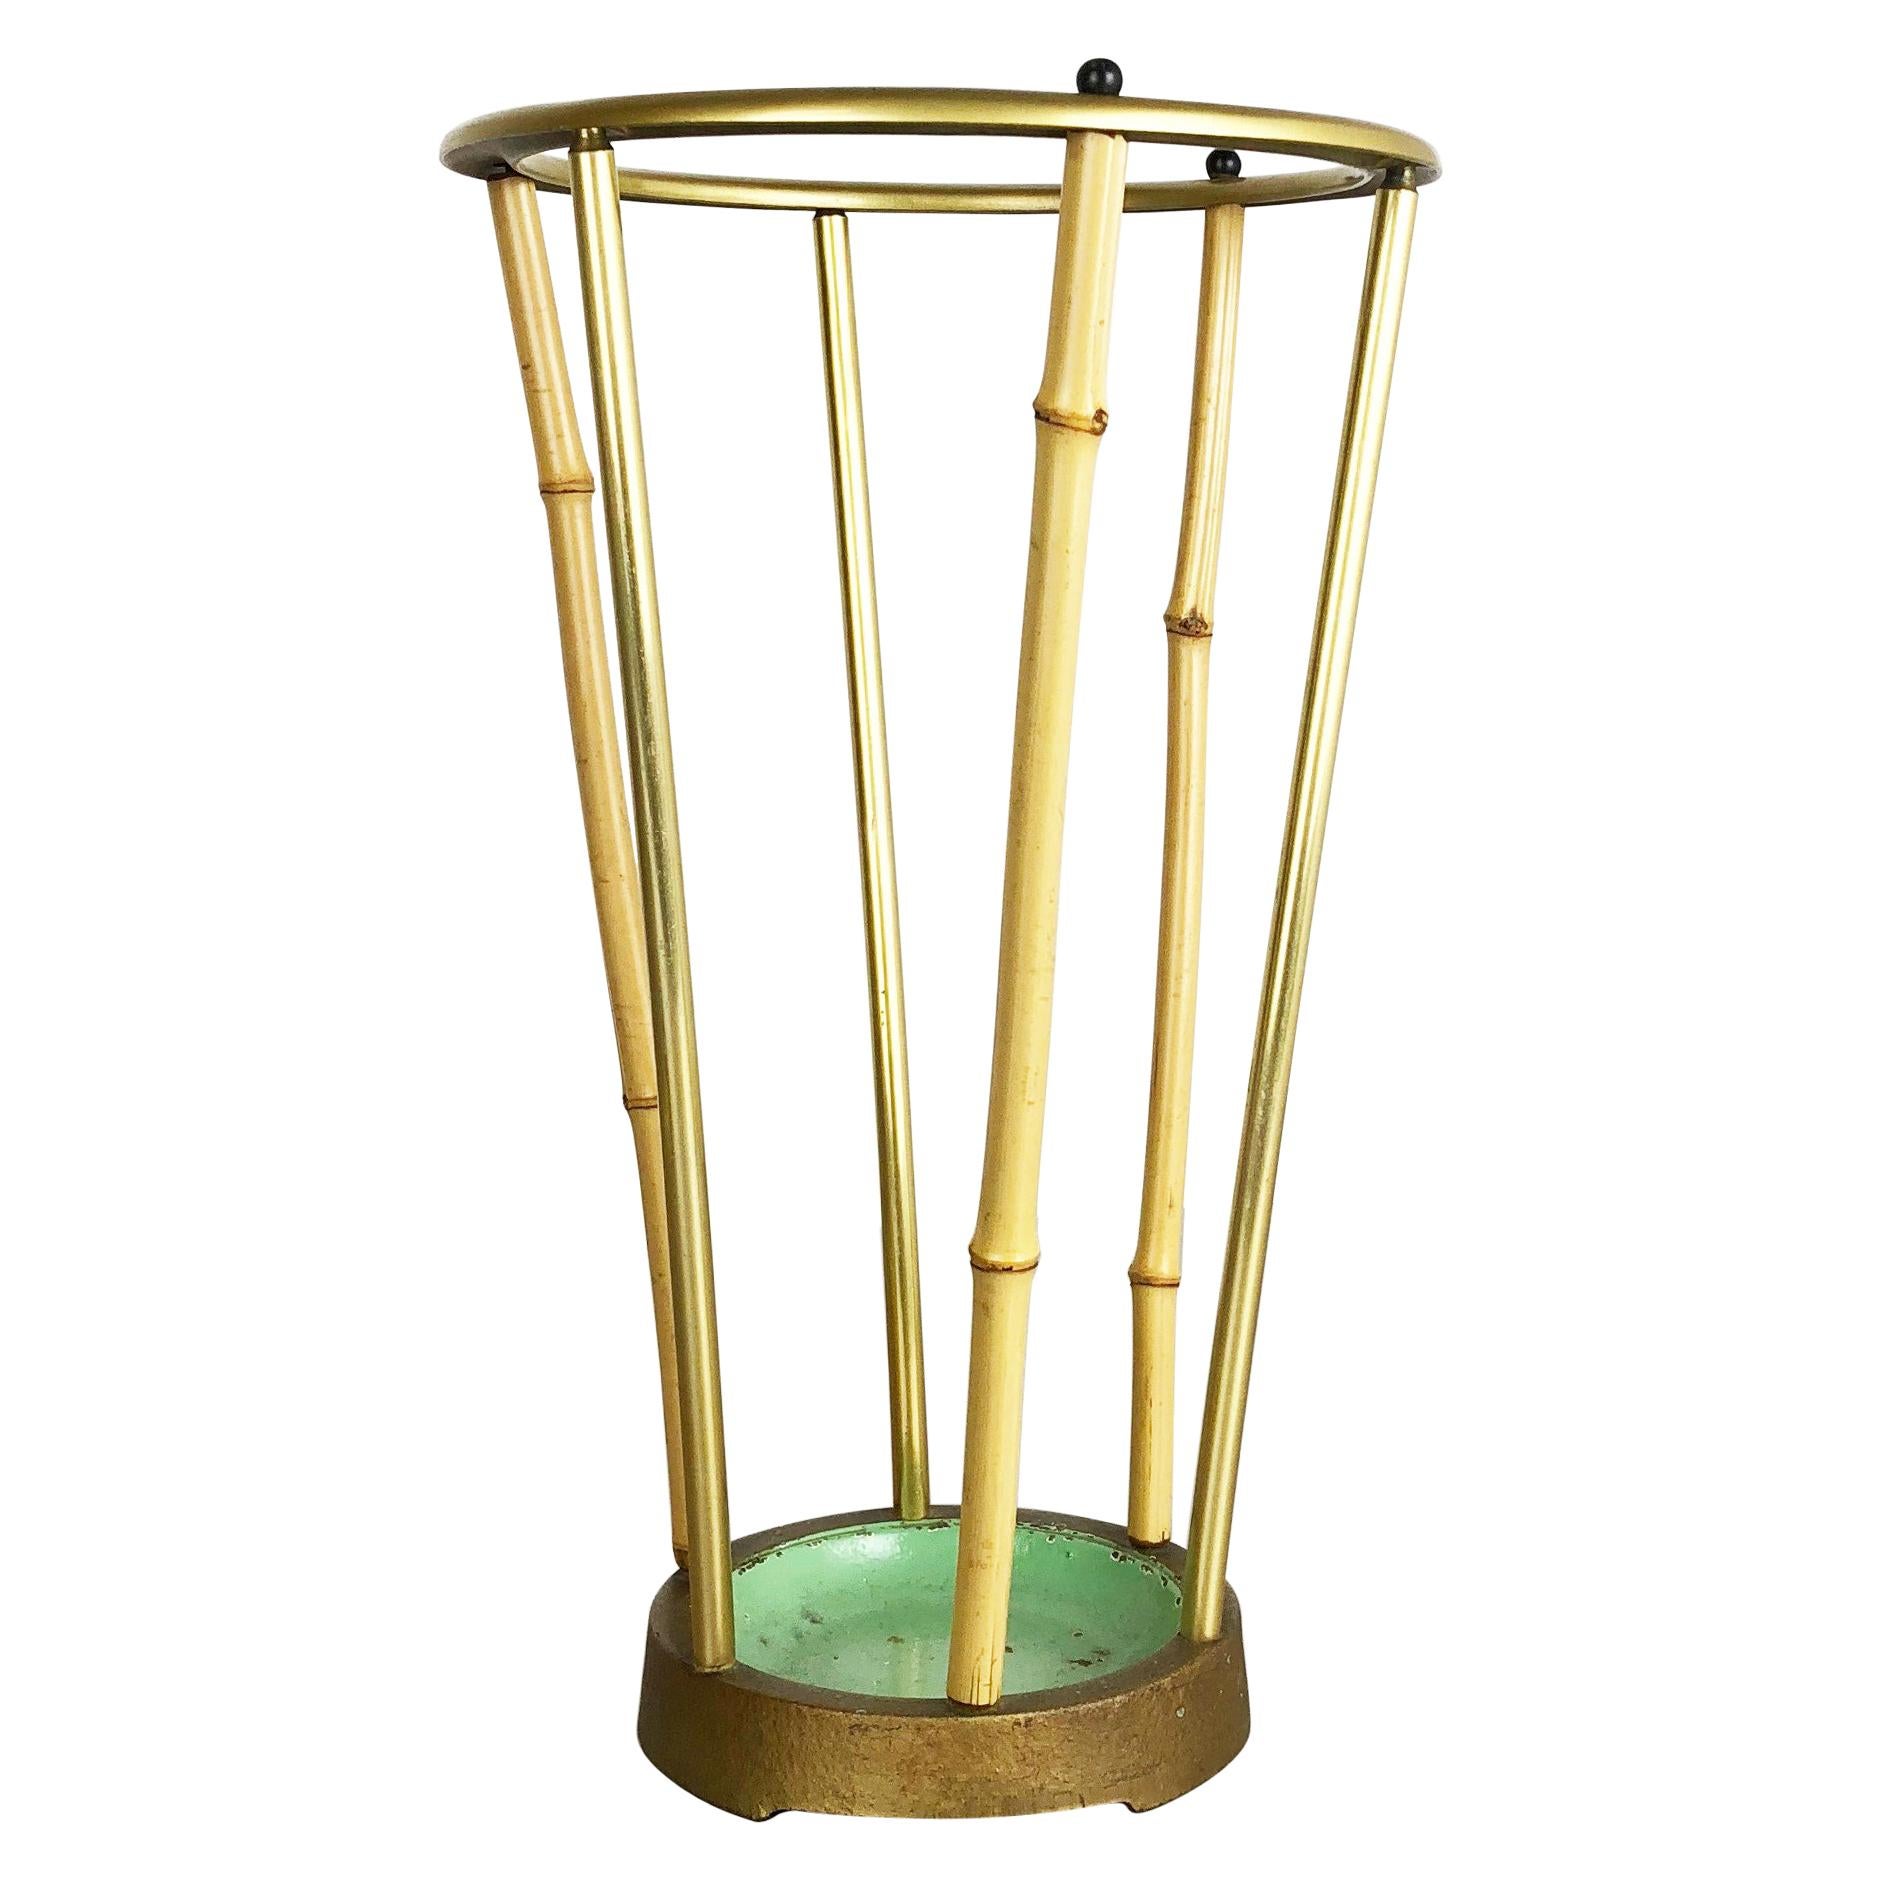 Midcentury Metal Brass and Bamboo Umbrella Stand, Germany, 1950s